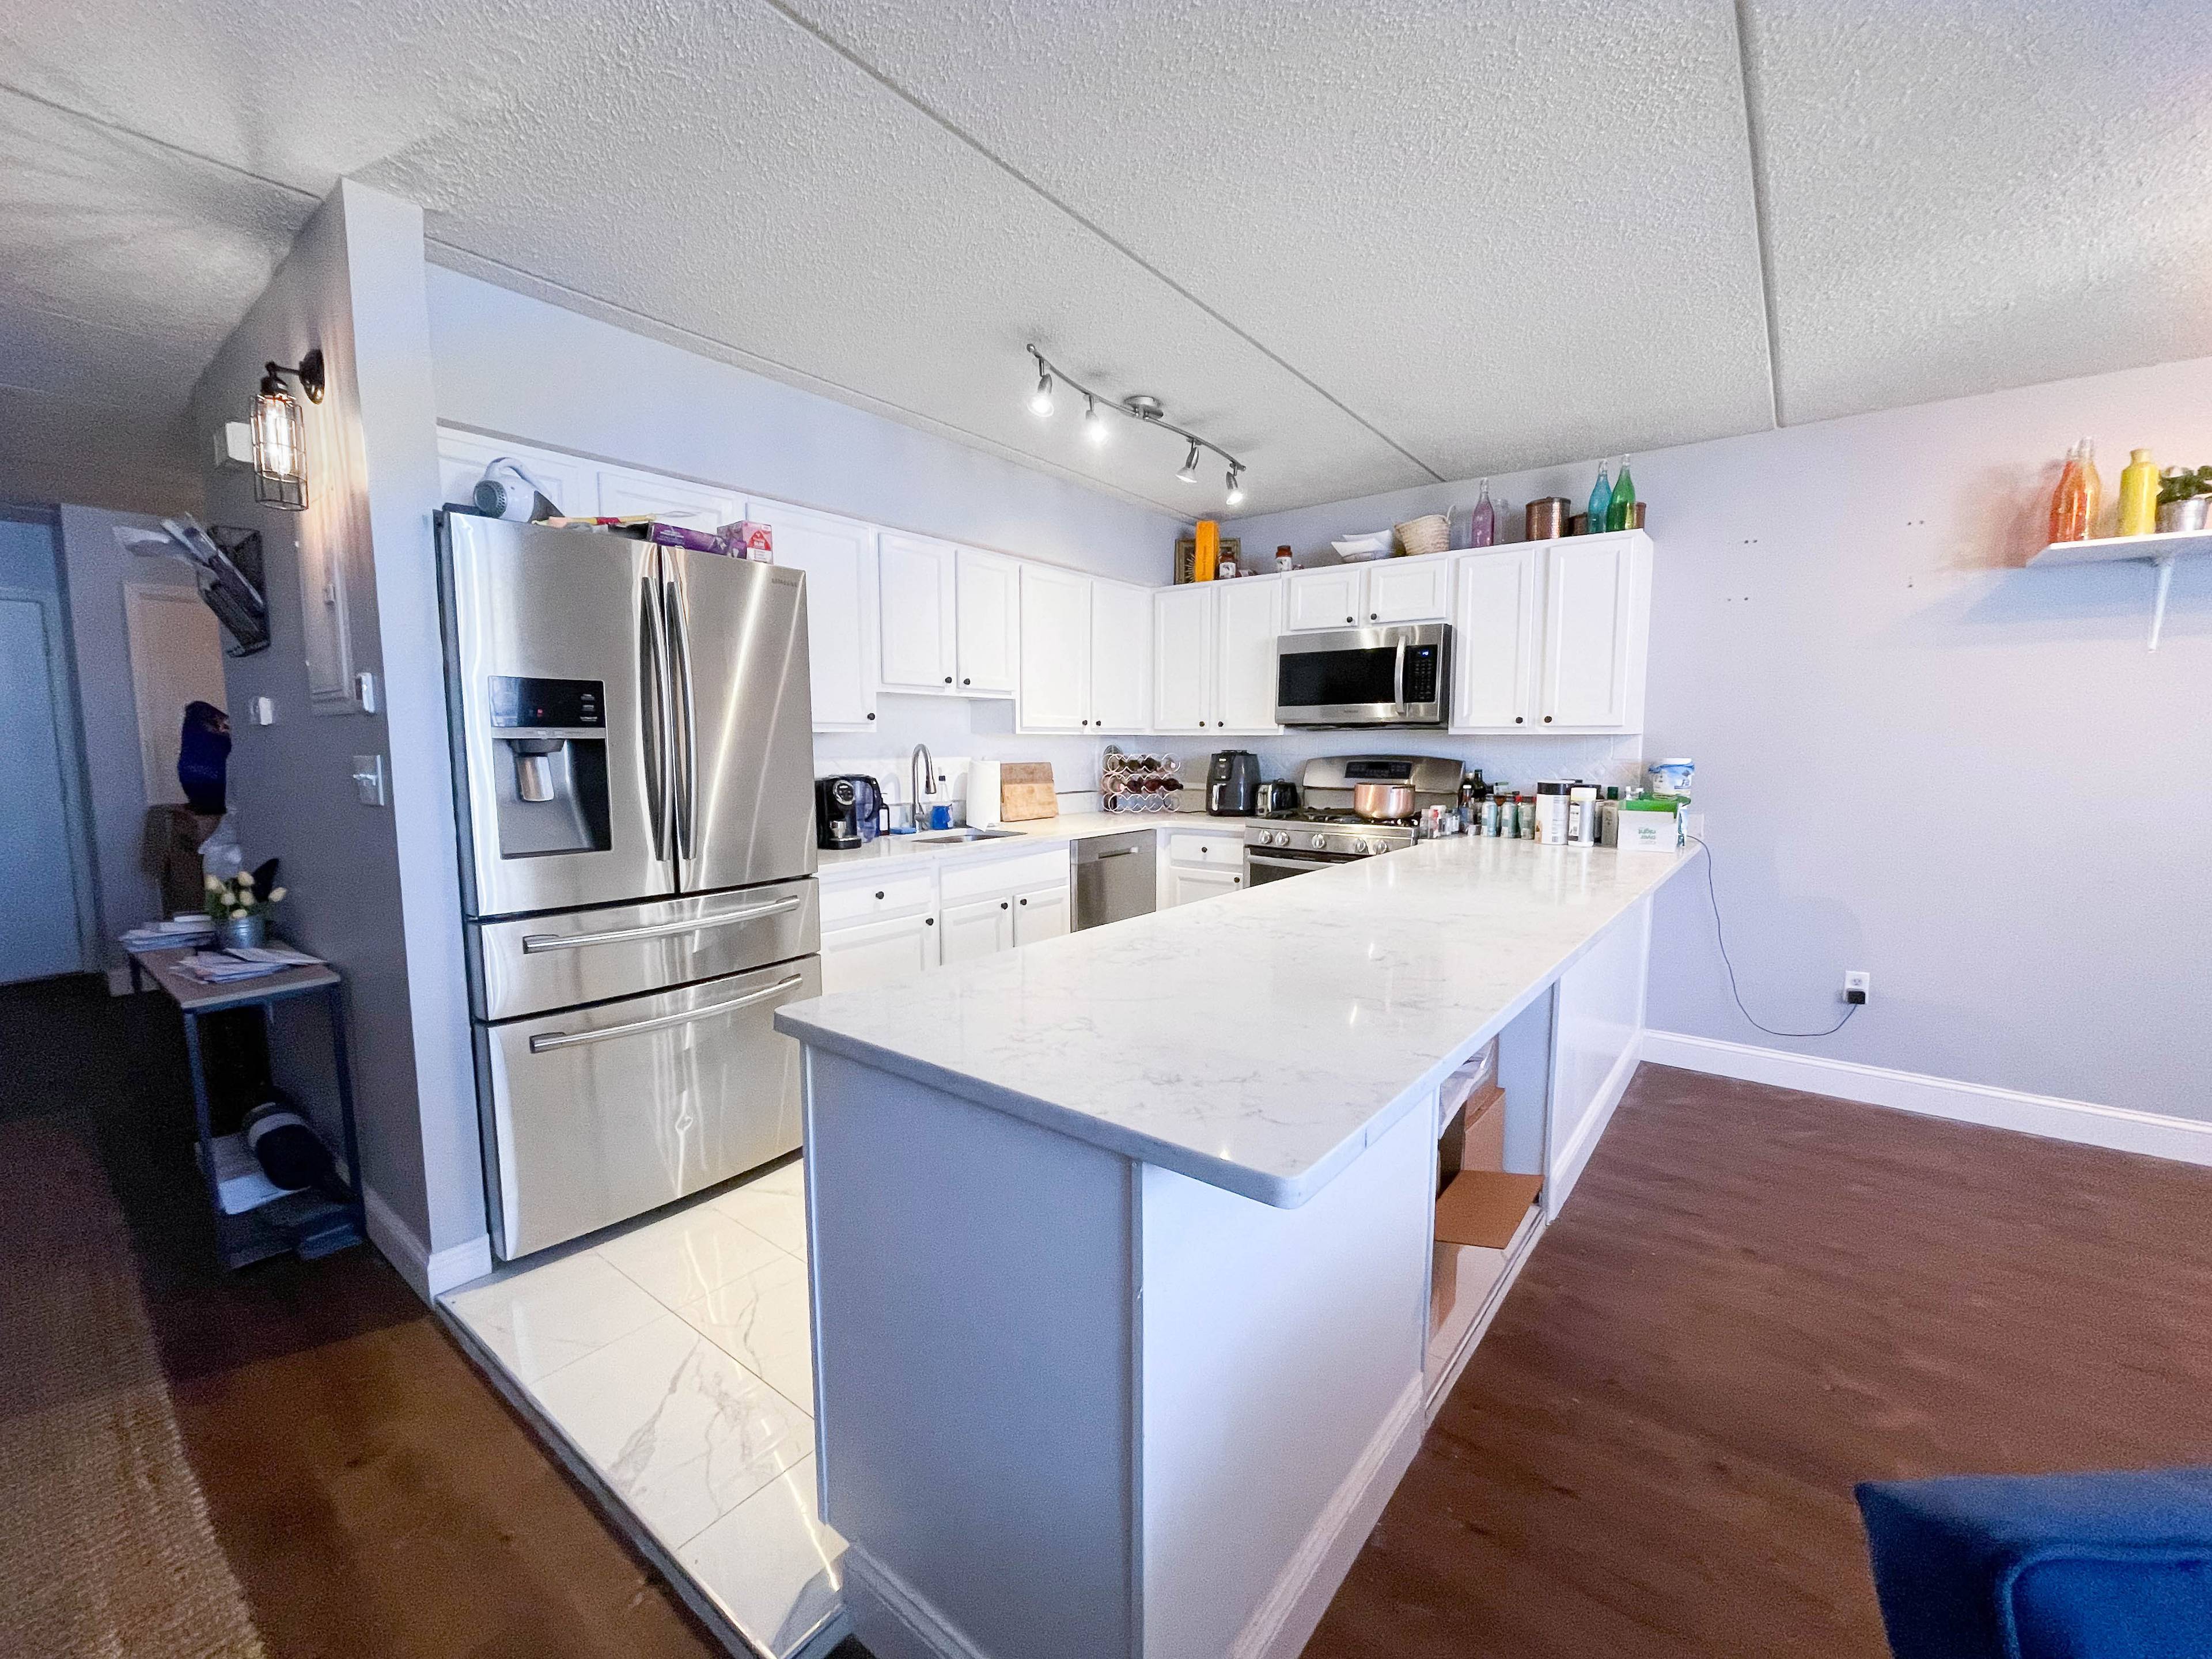 pacious Three Bedroom Duplex apartment situated on a quiet cul de sac in Bushwick, Brooklyn.